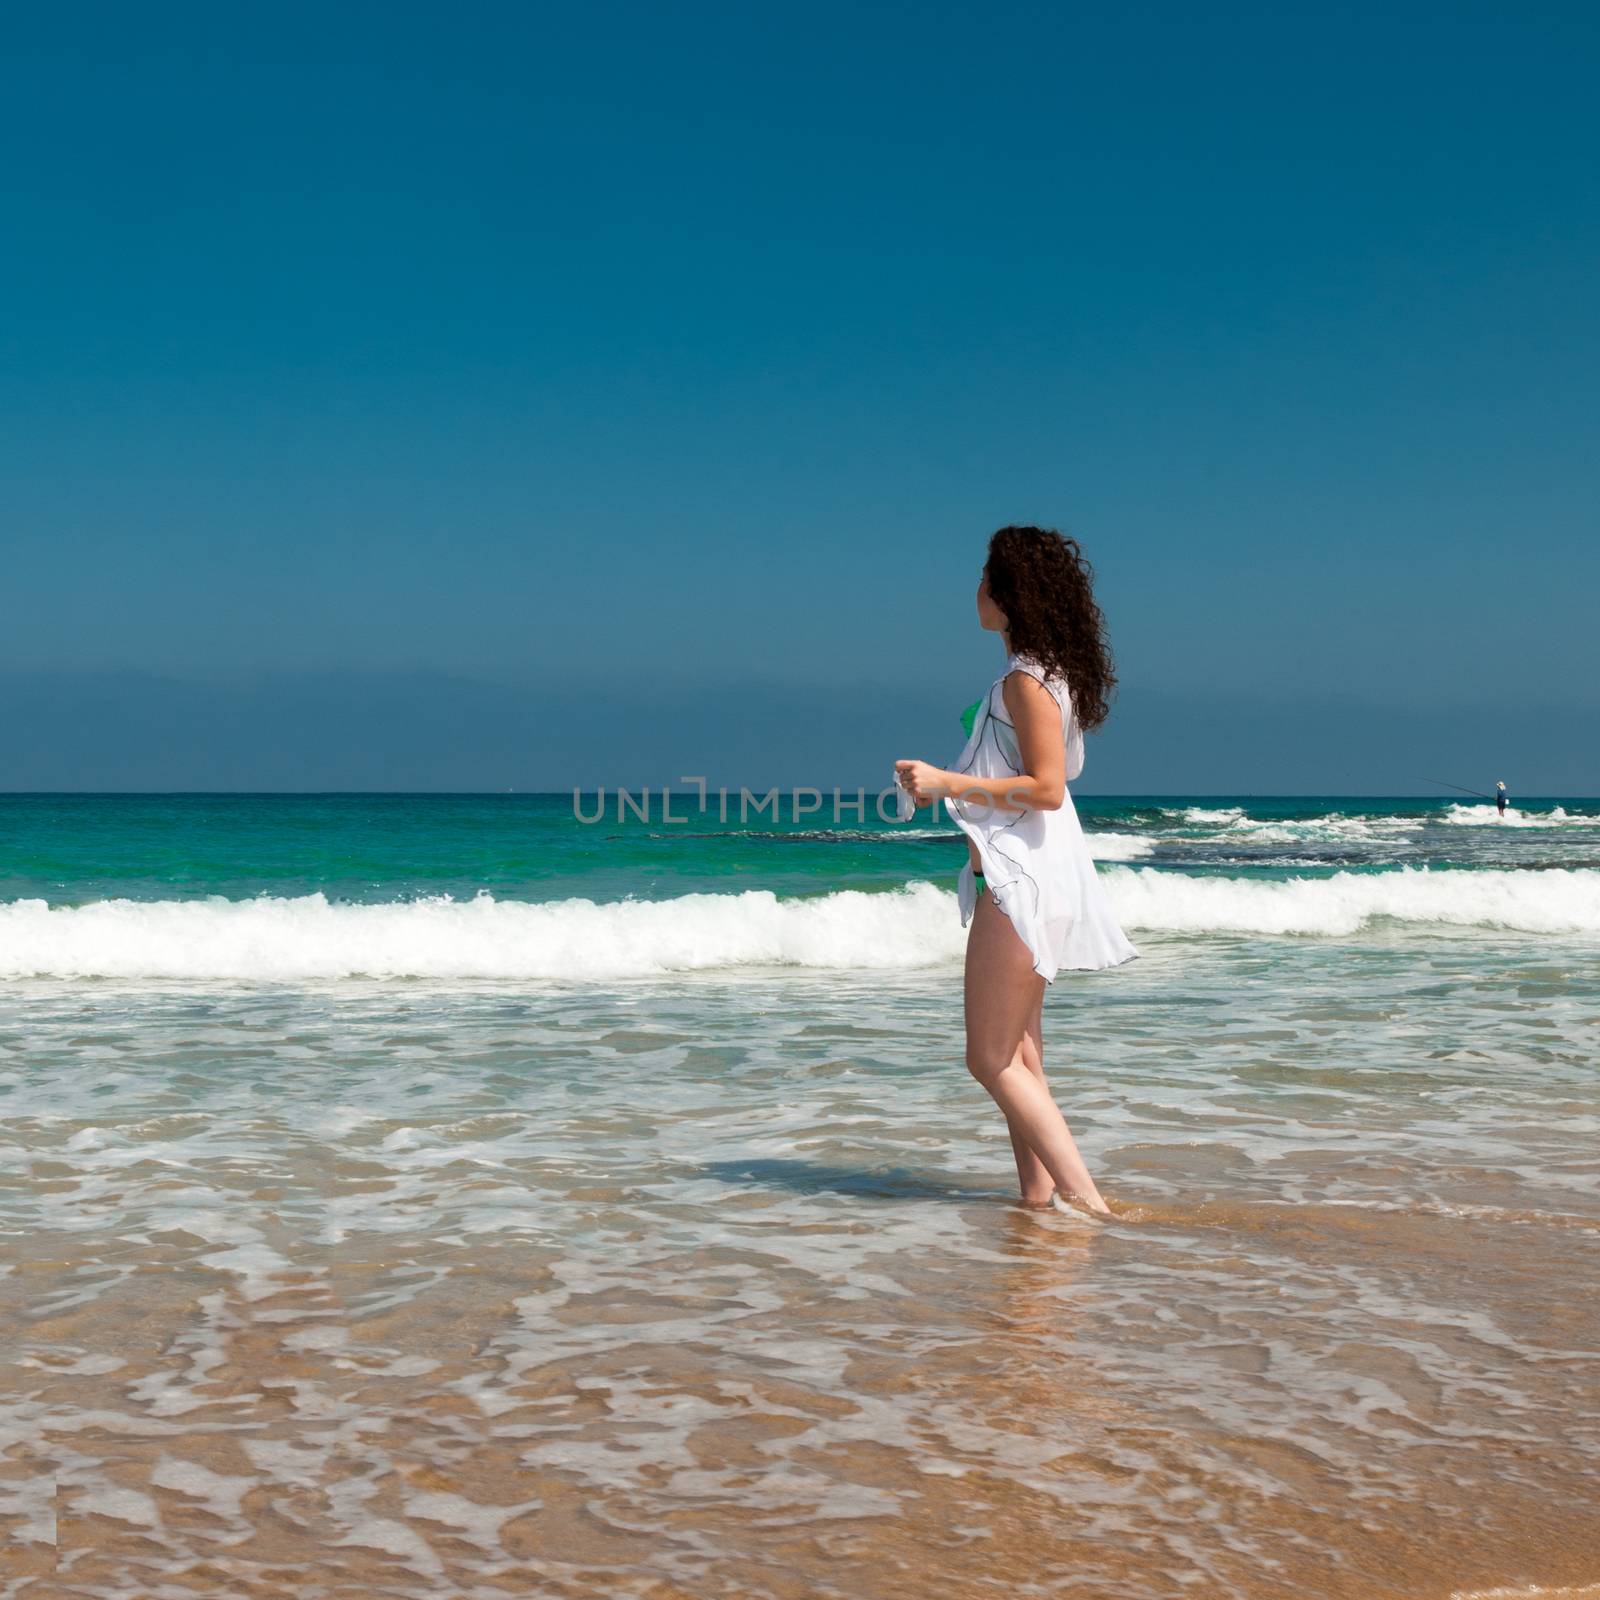 A model in a green bikini and white, translucent cape is photographed on the sea beach